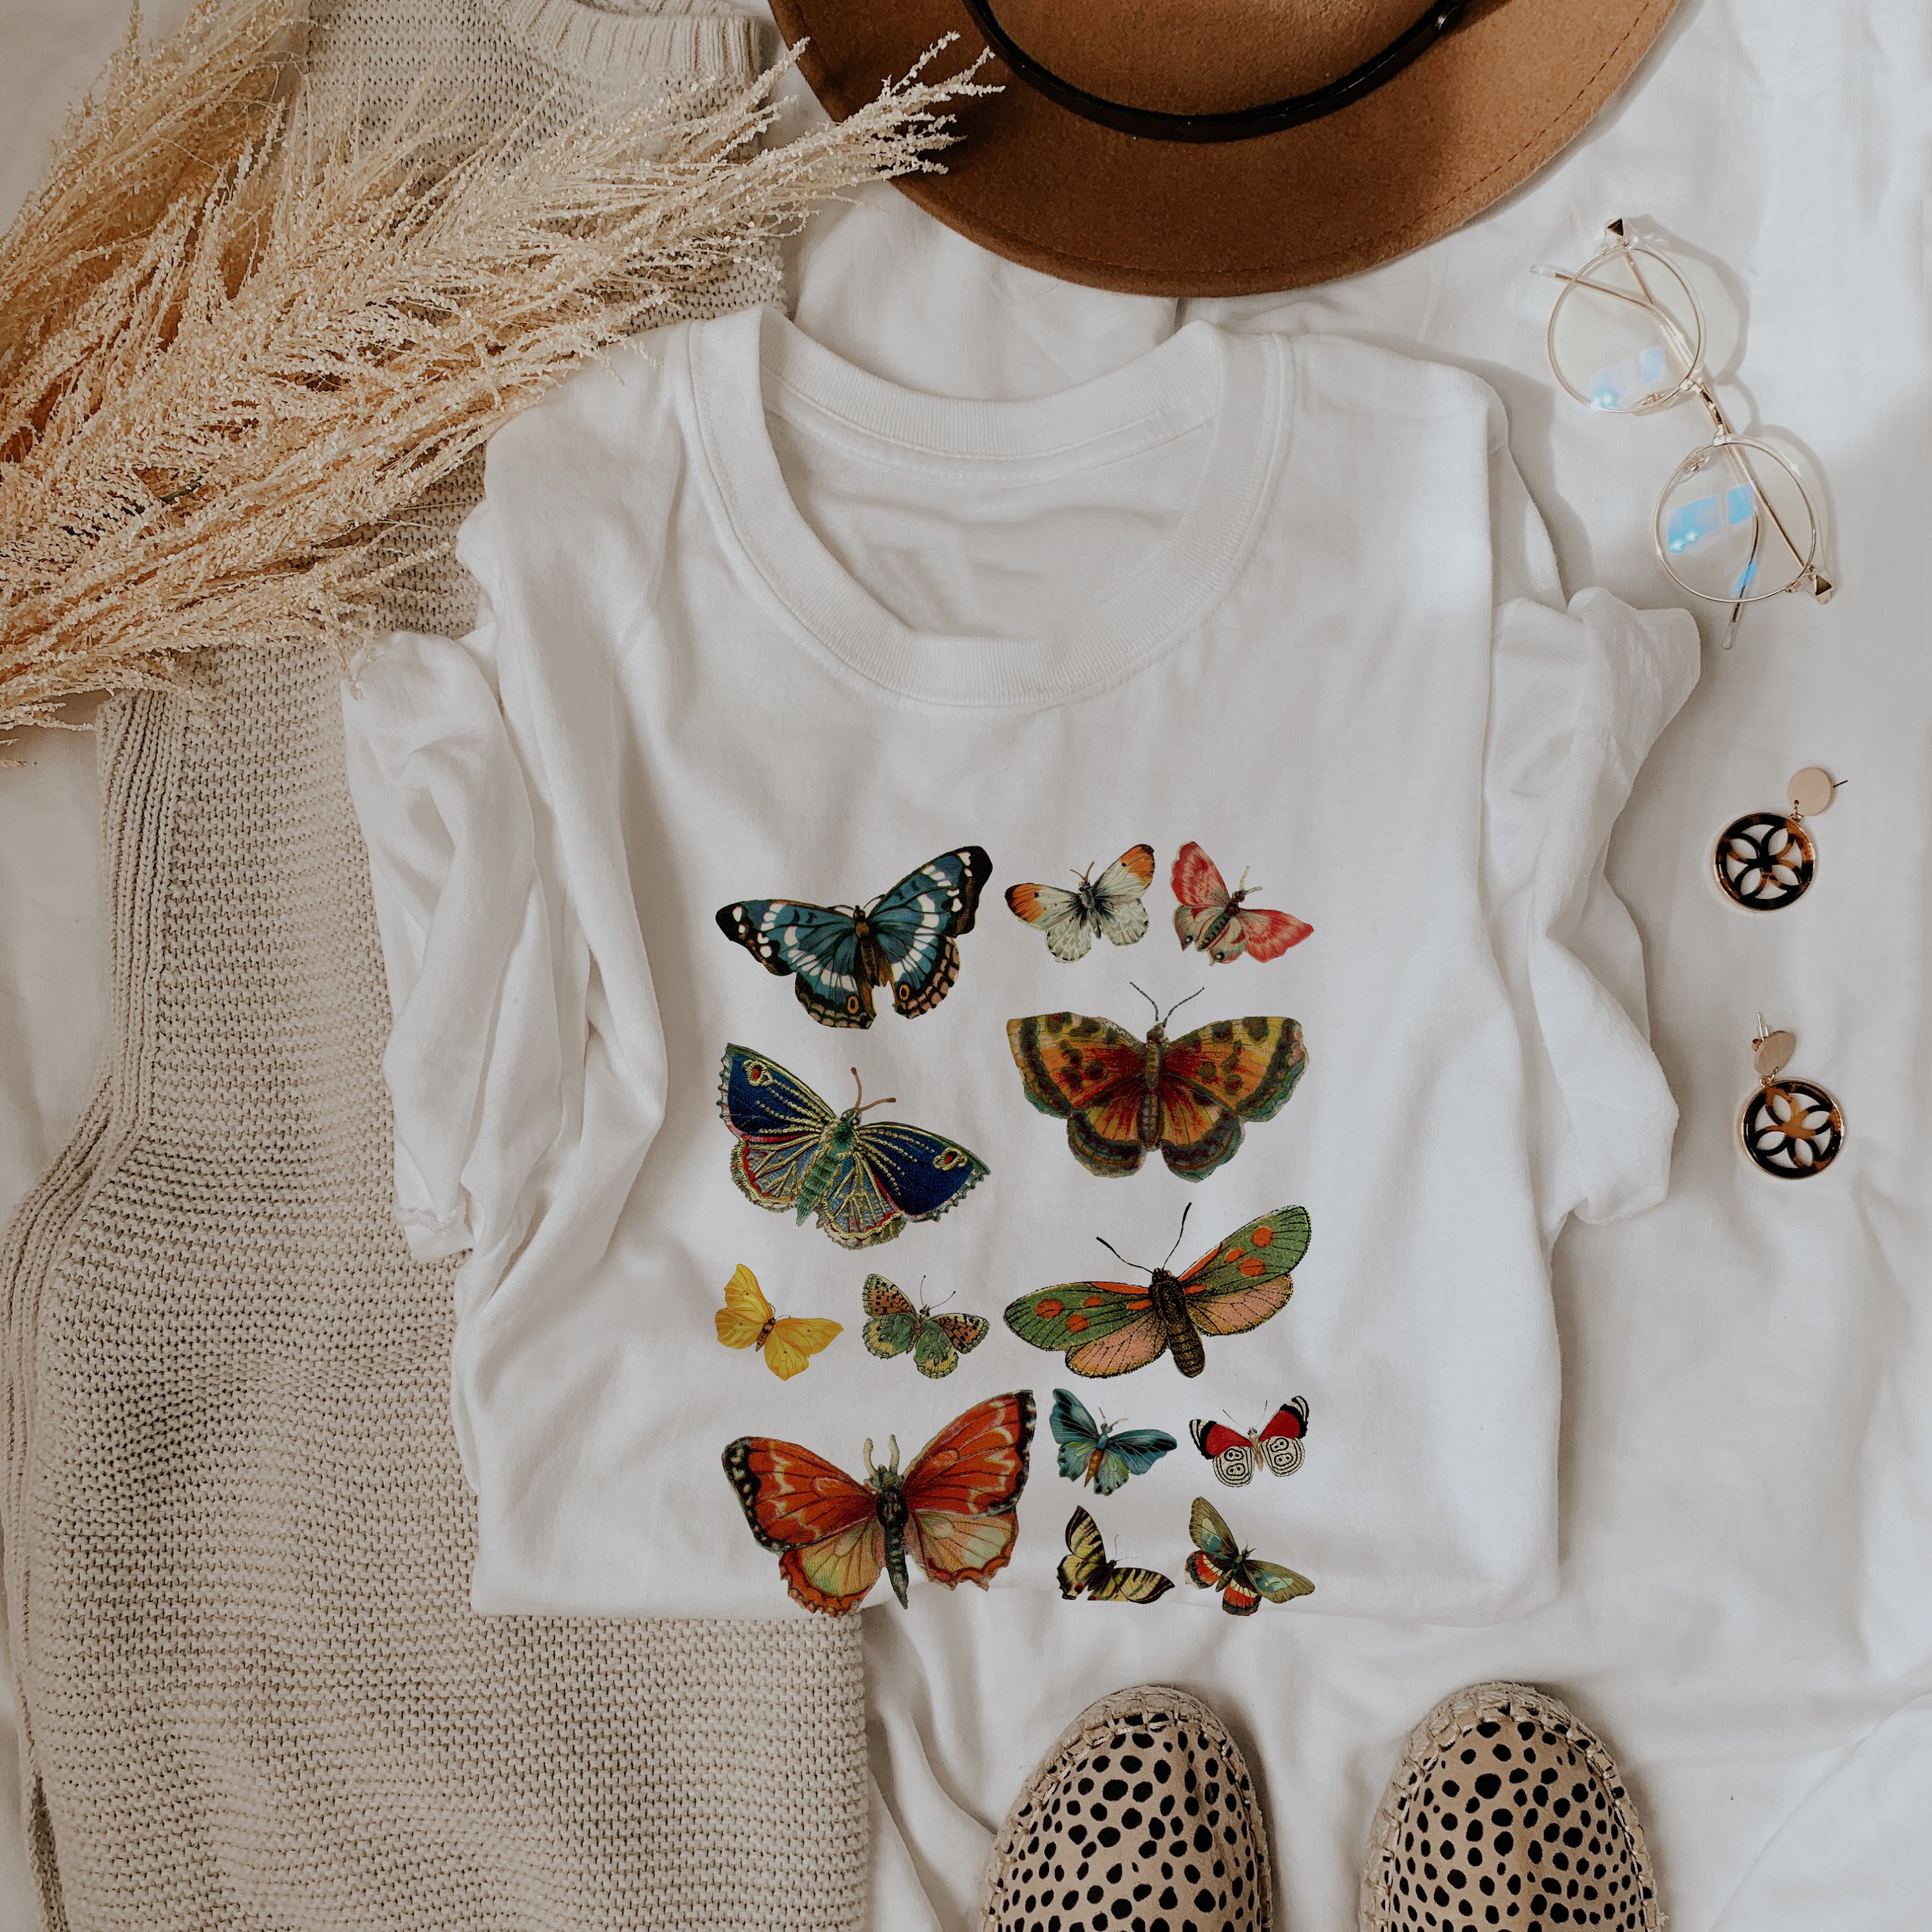 Vintage butterfly tshirt butterfly shirt butterfly tshirt | Etsy